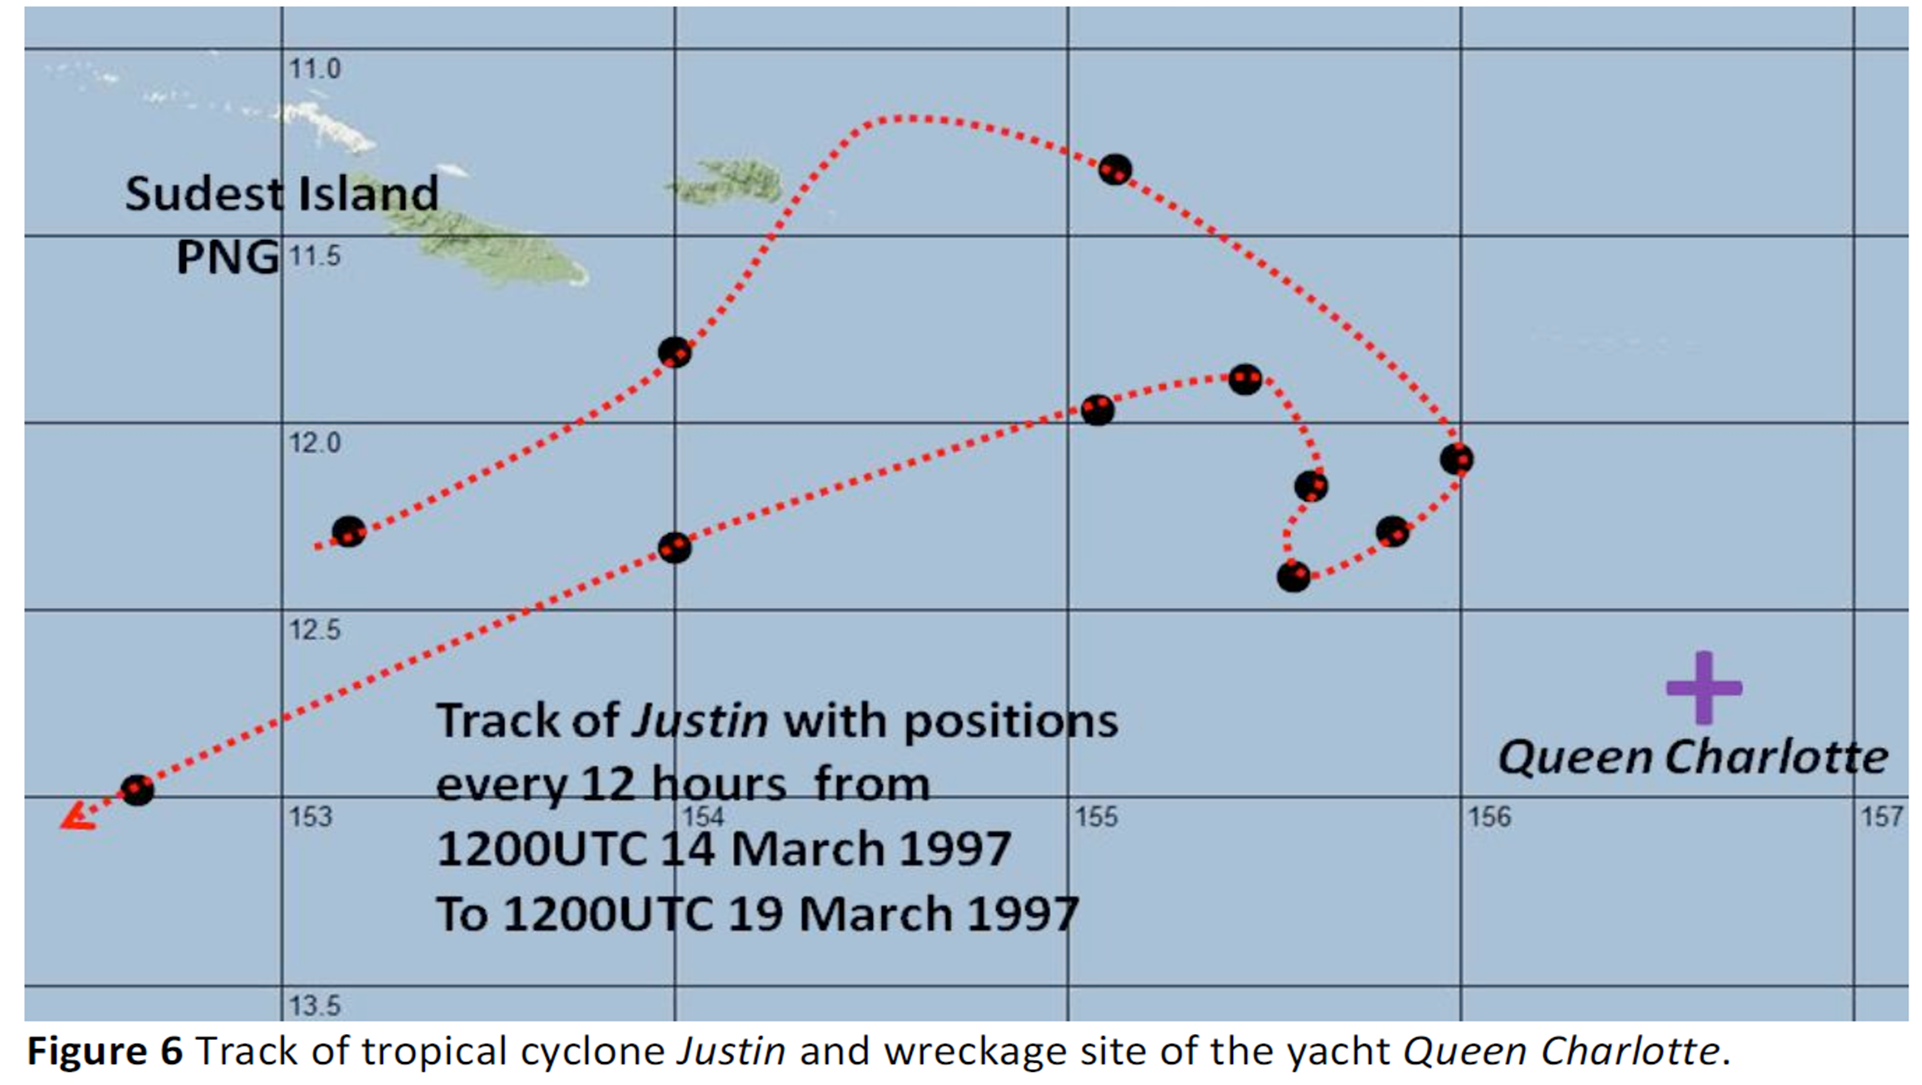 Track of tropical cyclone Justin and wreckage site of the yacht Queen Charlotte.